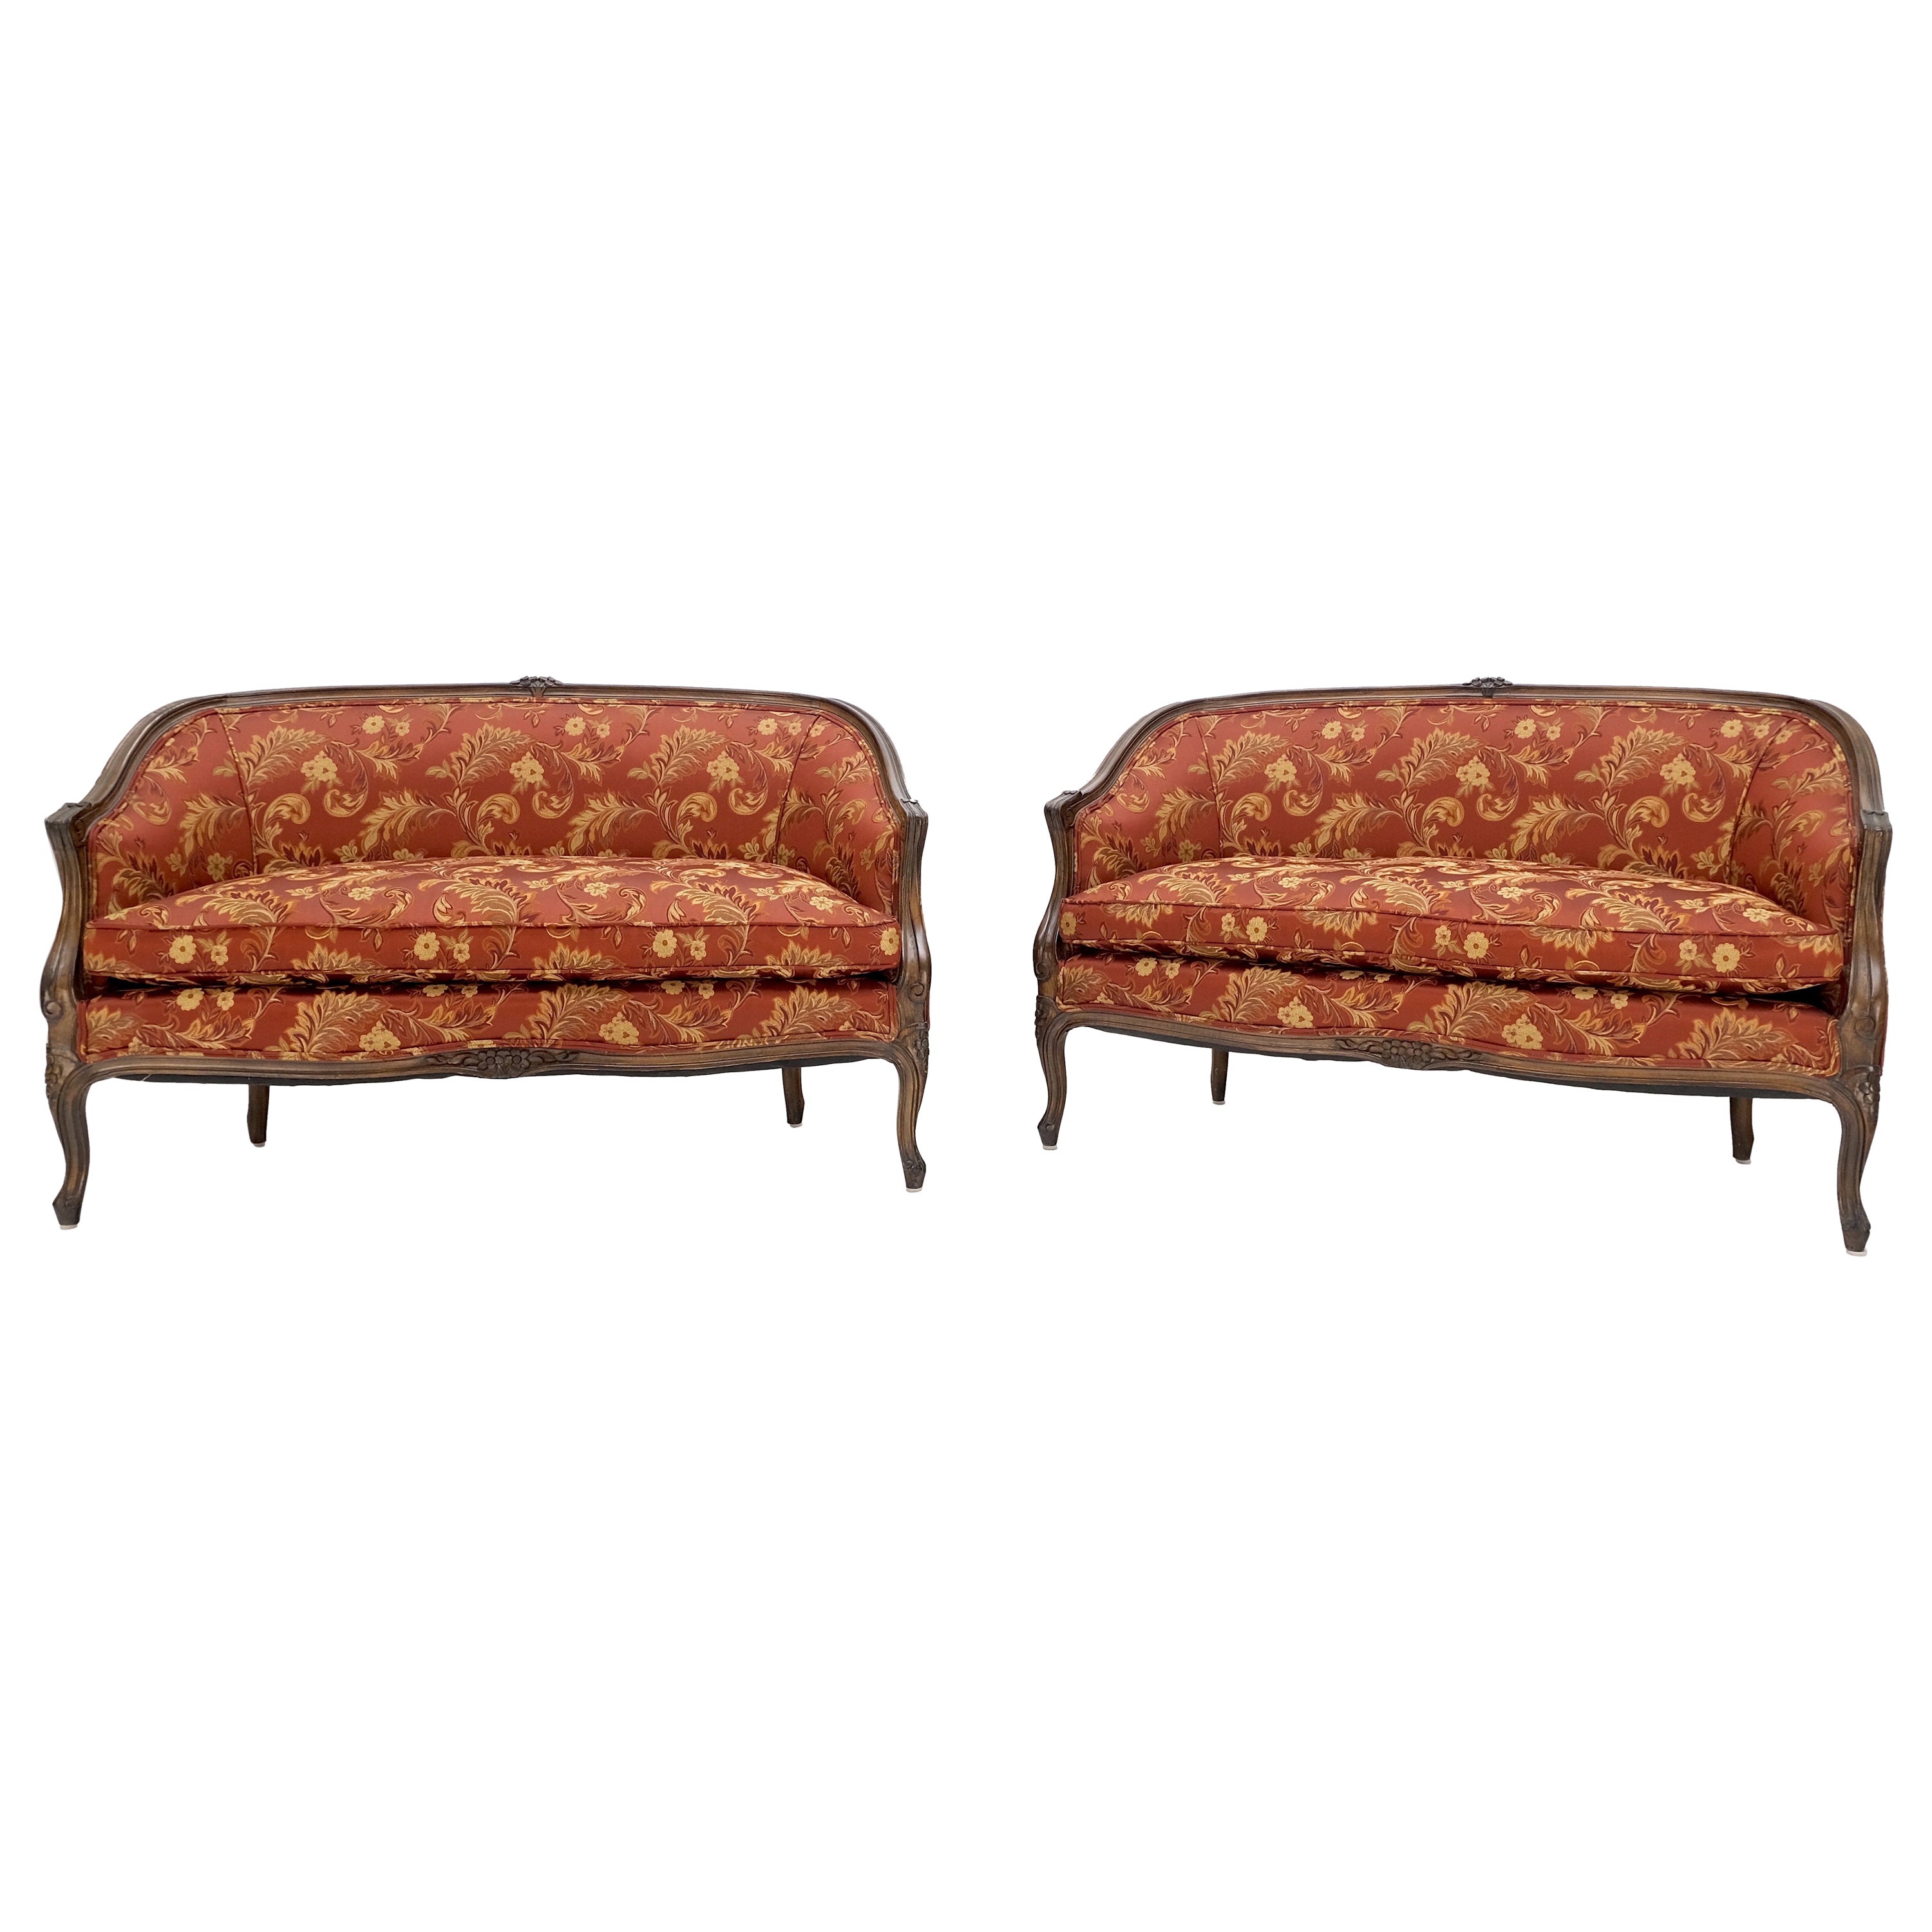 Pair of Mint Condition Carved Walnut Country French Down Cushions Compact Sofas For Sale